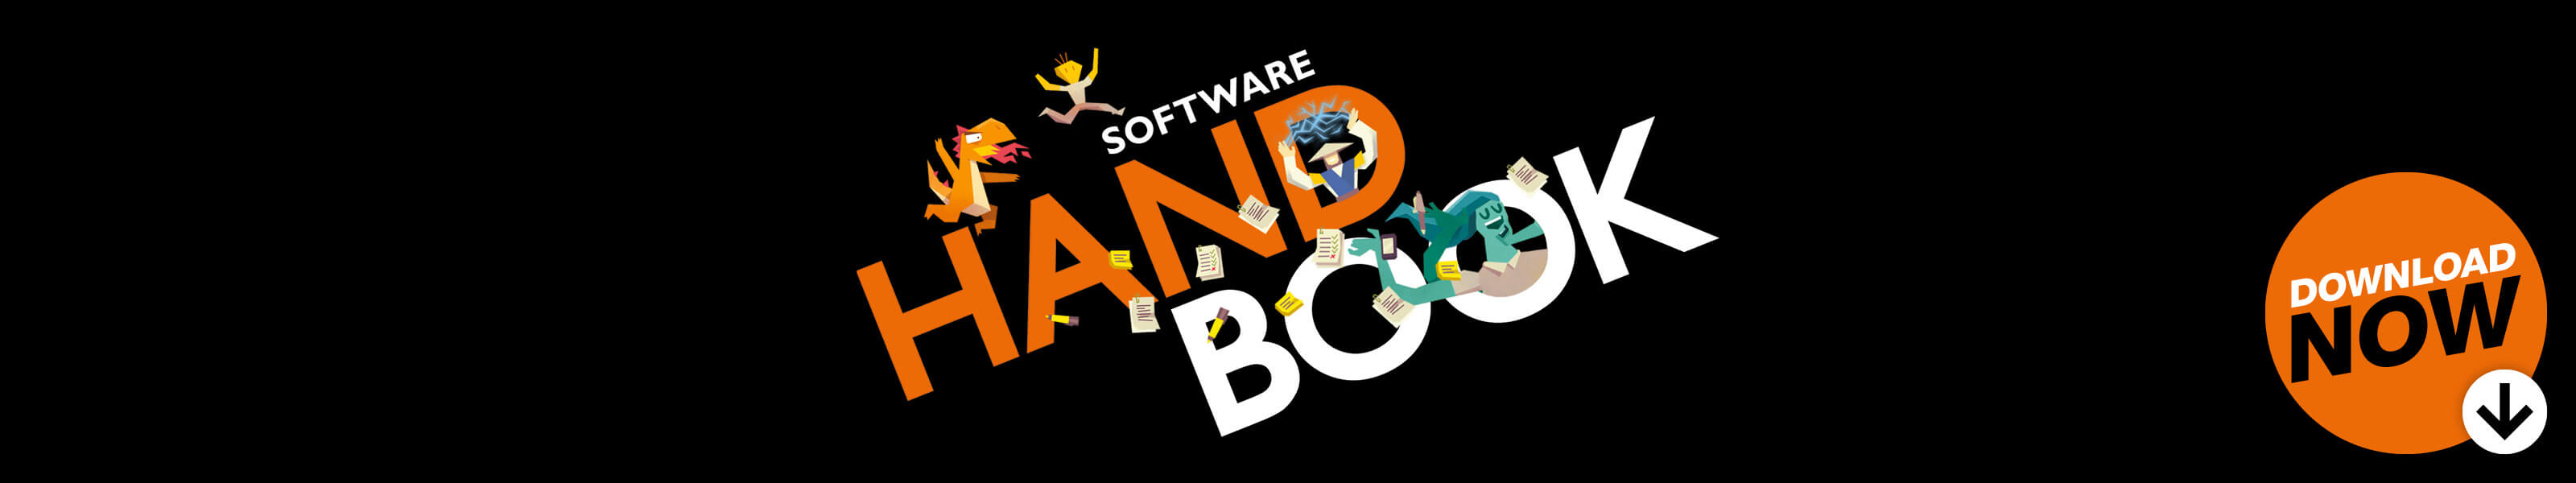 Software Handbook graphic in the centre with avatars and the download now CTA to the right